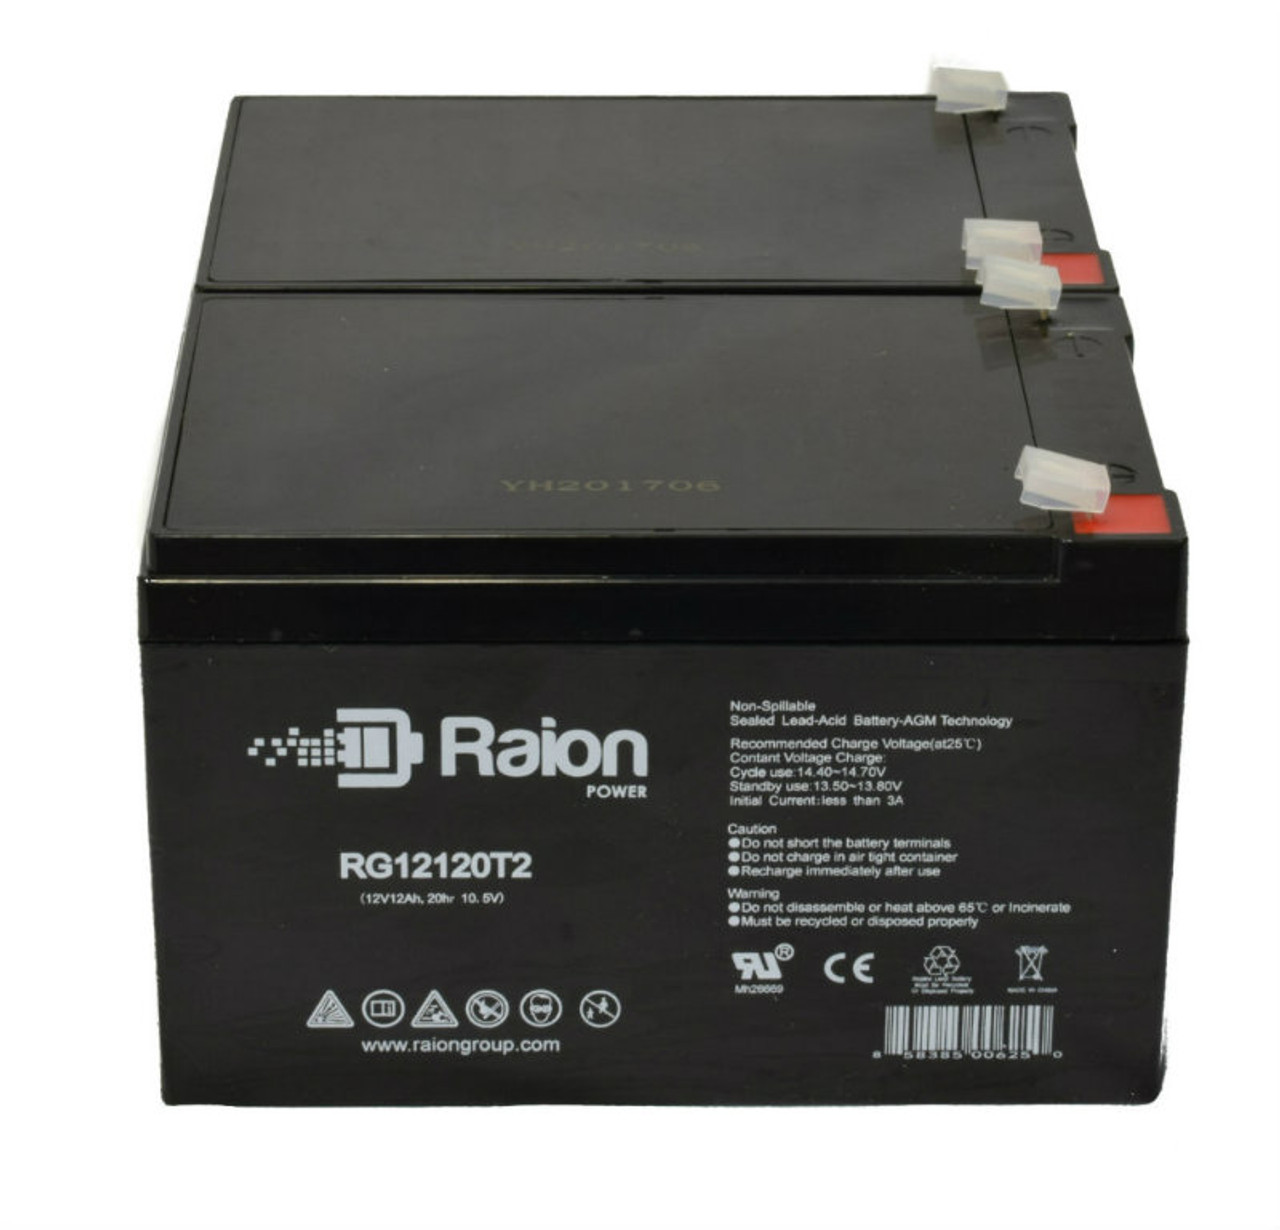 Raion Power 12V 12Ah Non-Spillable Compatible Replacement Battery for Panasonic LC-RA1212P - (2 Pack)